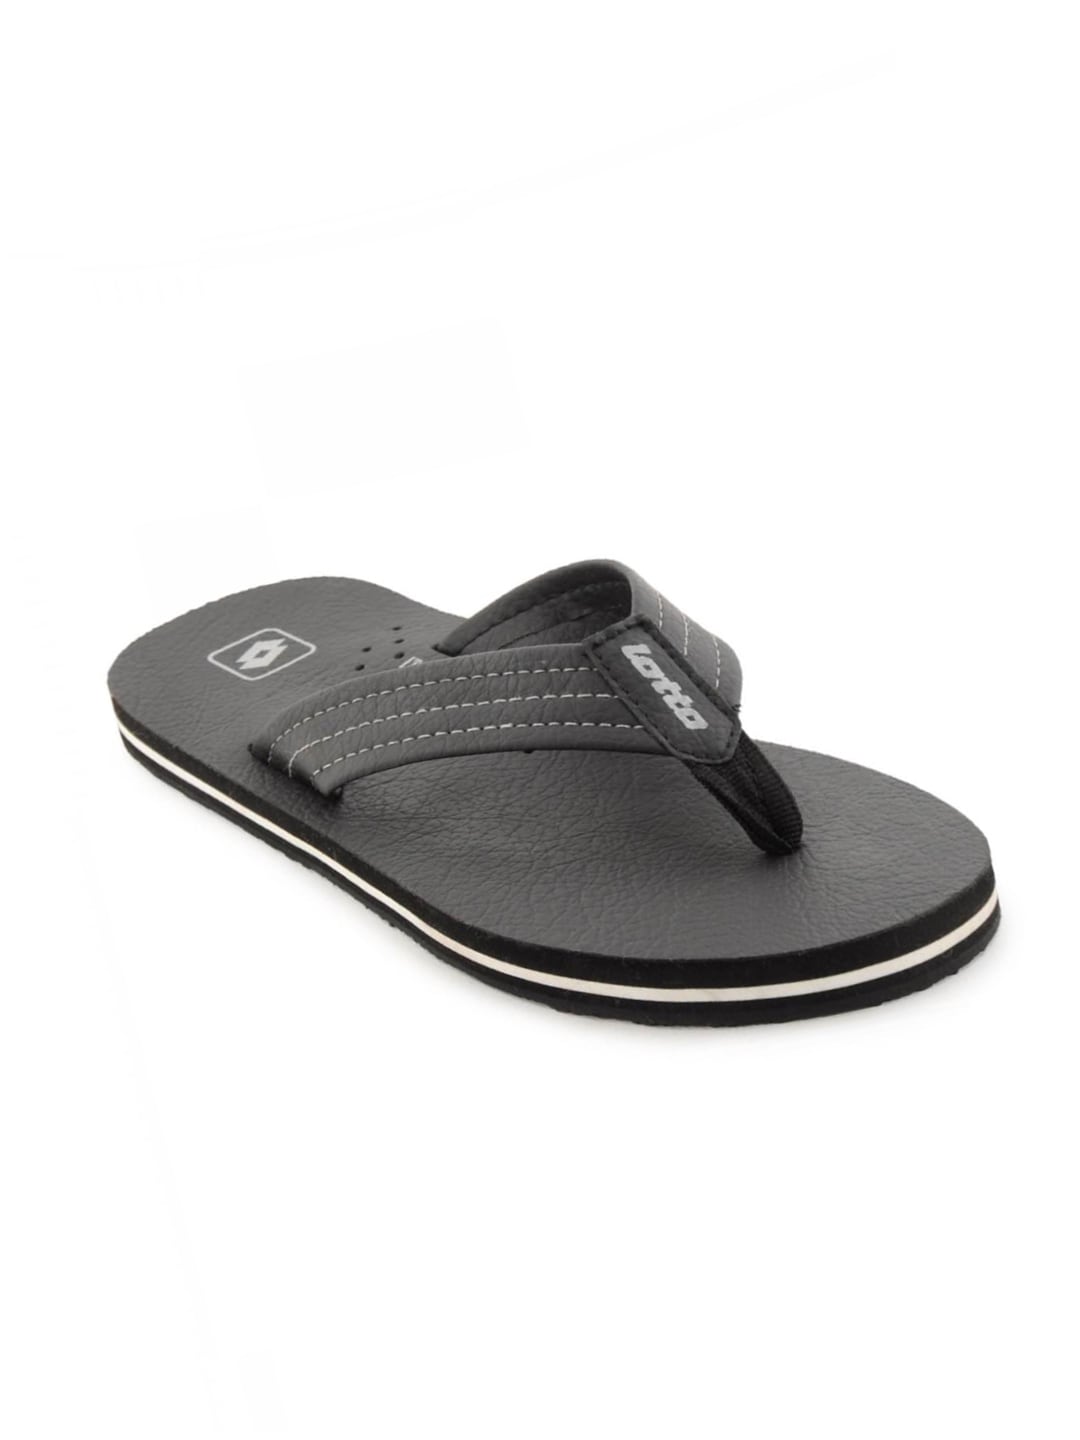 Lotto Unisex Arch Black Slippers